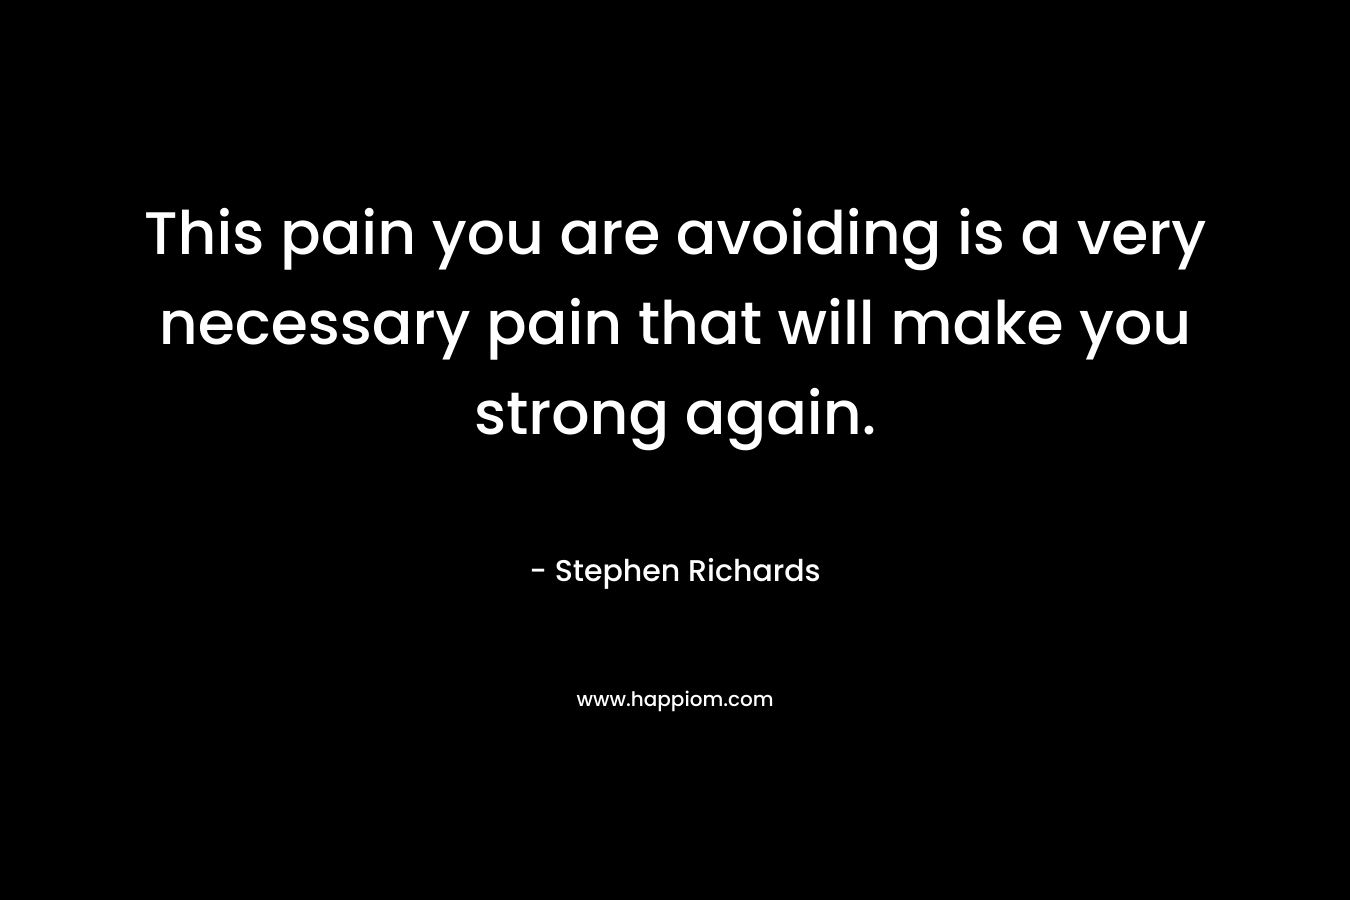 This pain you are avoiding is a very necessary pain that will make you strong again.